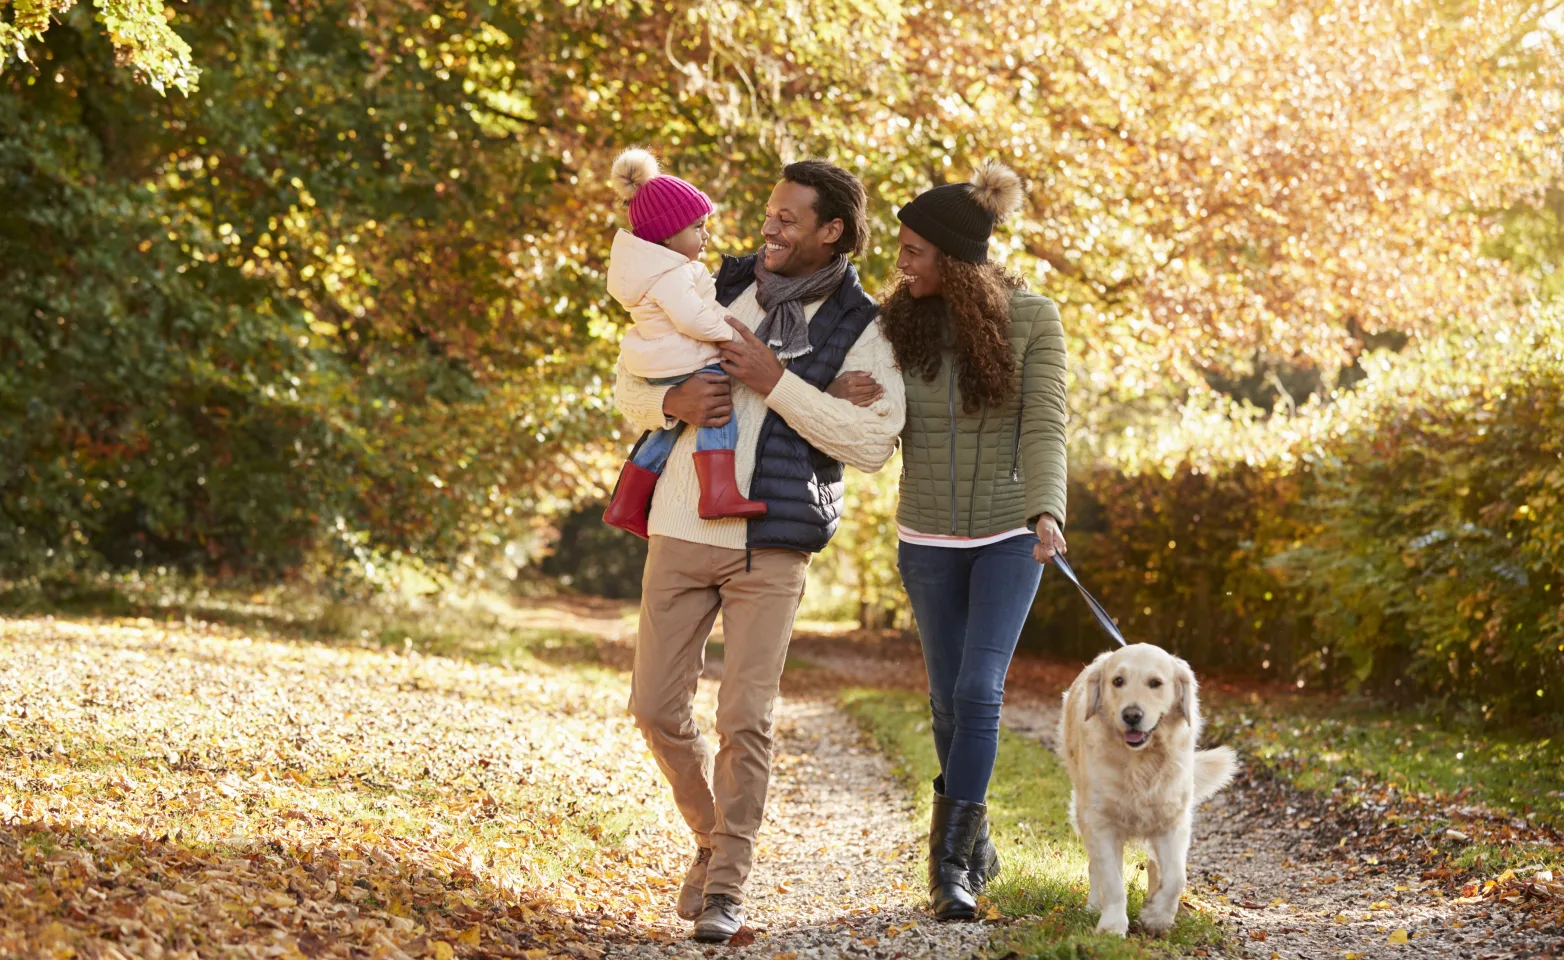 A husband and wife walking in a park with their golden retriever as the dad and mom are smiling and holding (dad) their toddler.